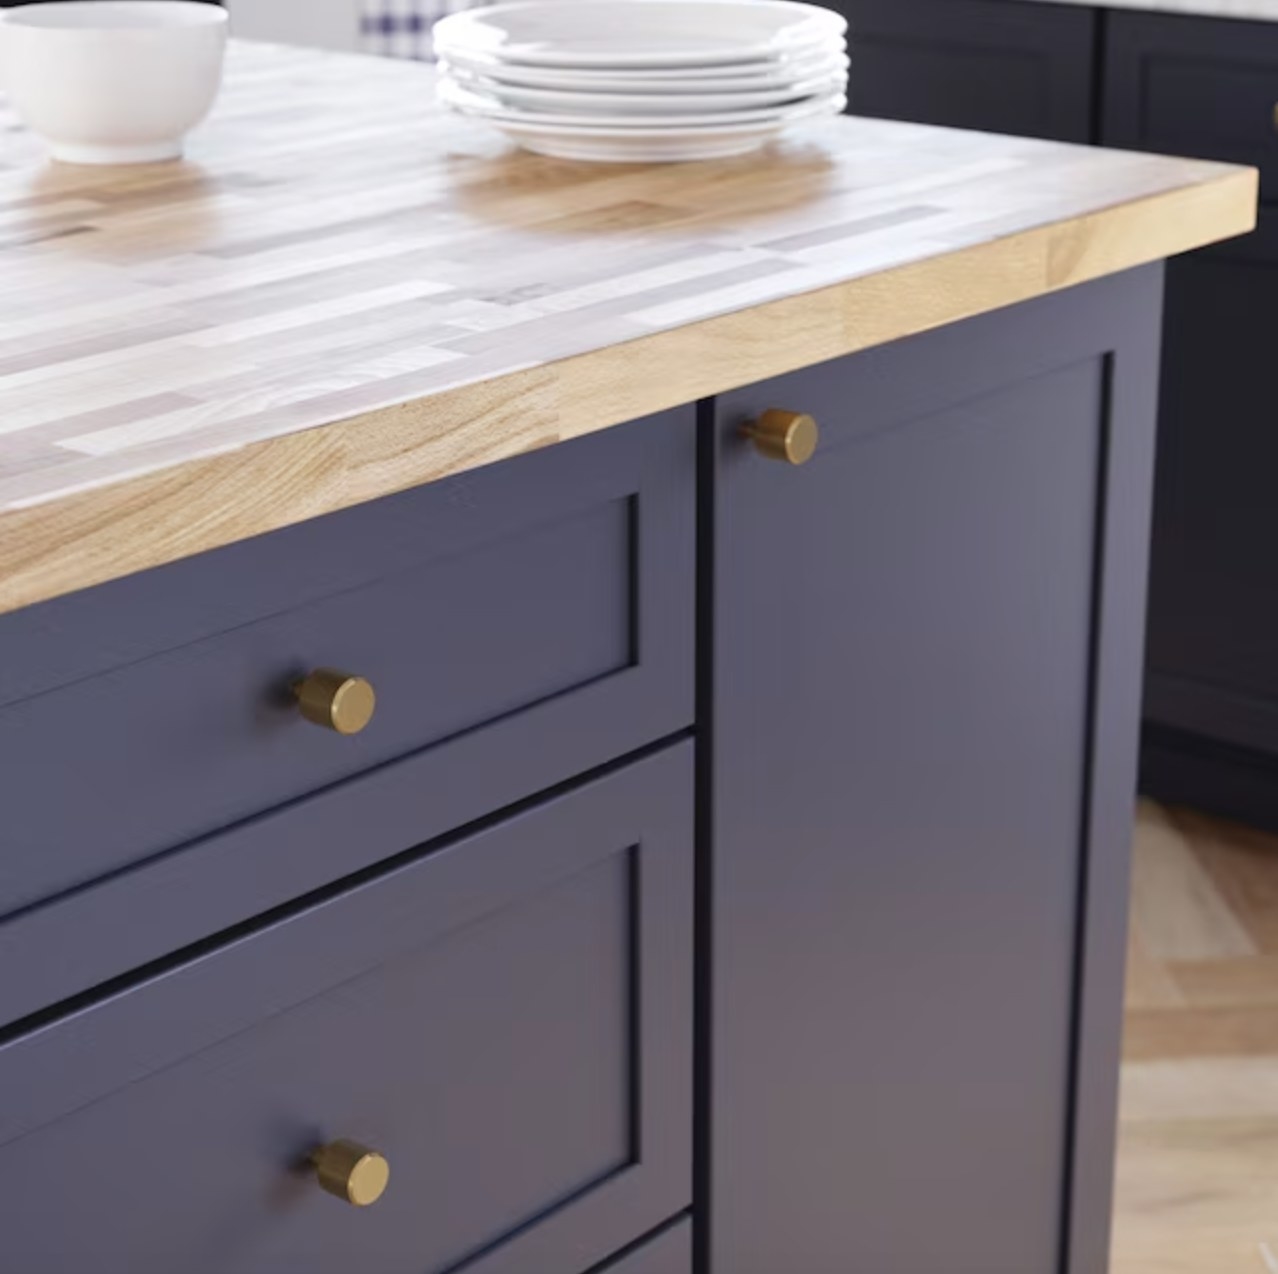 the gold round knobs on blue cabinets with a wooden countertop